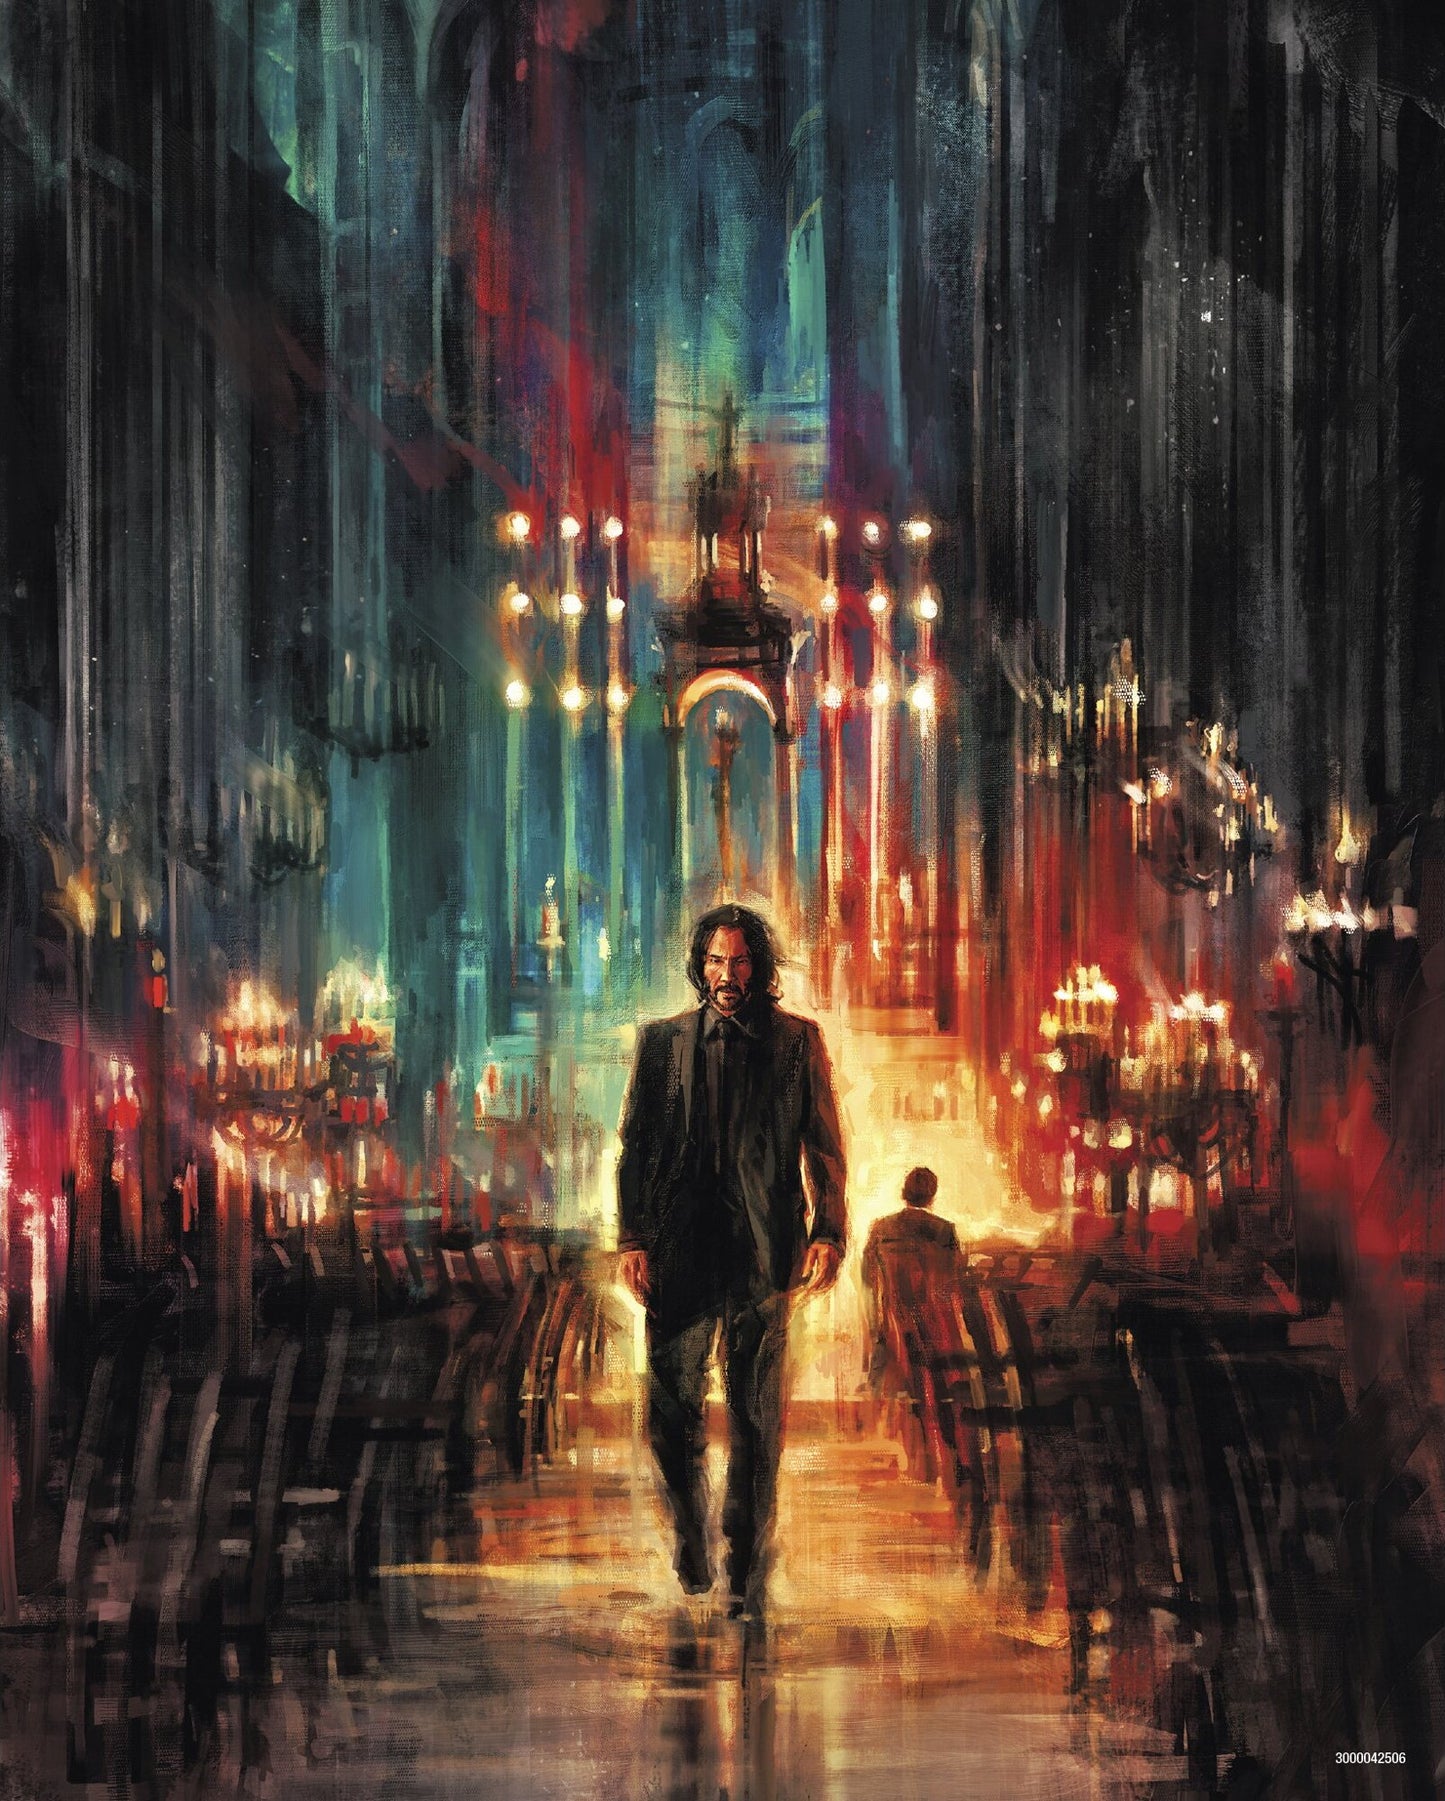 John Wick: Chapter 4 4K - Limited Edition Collector's Set w/ Poster (2023)(Exclusive)